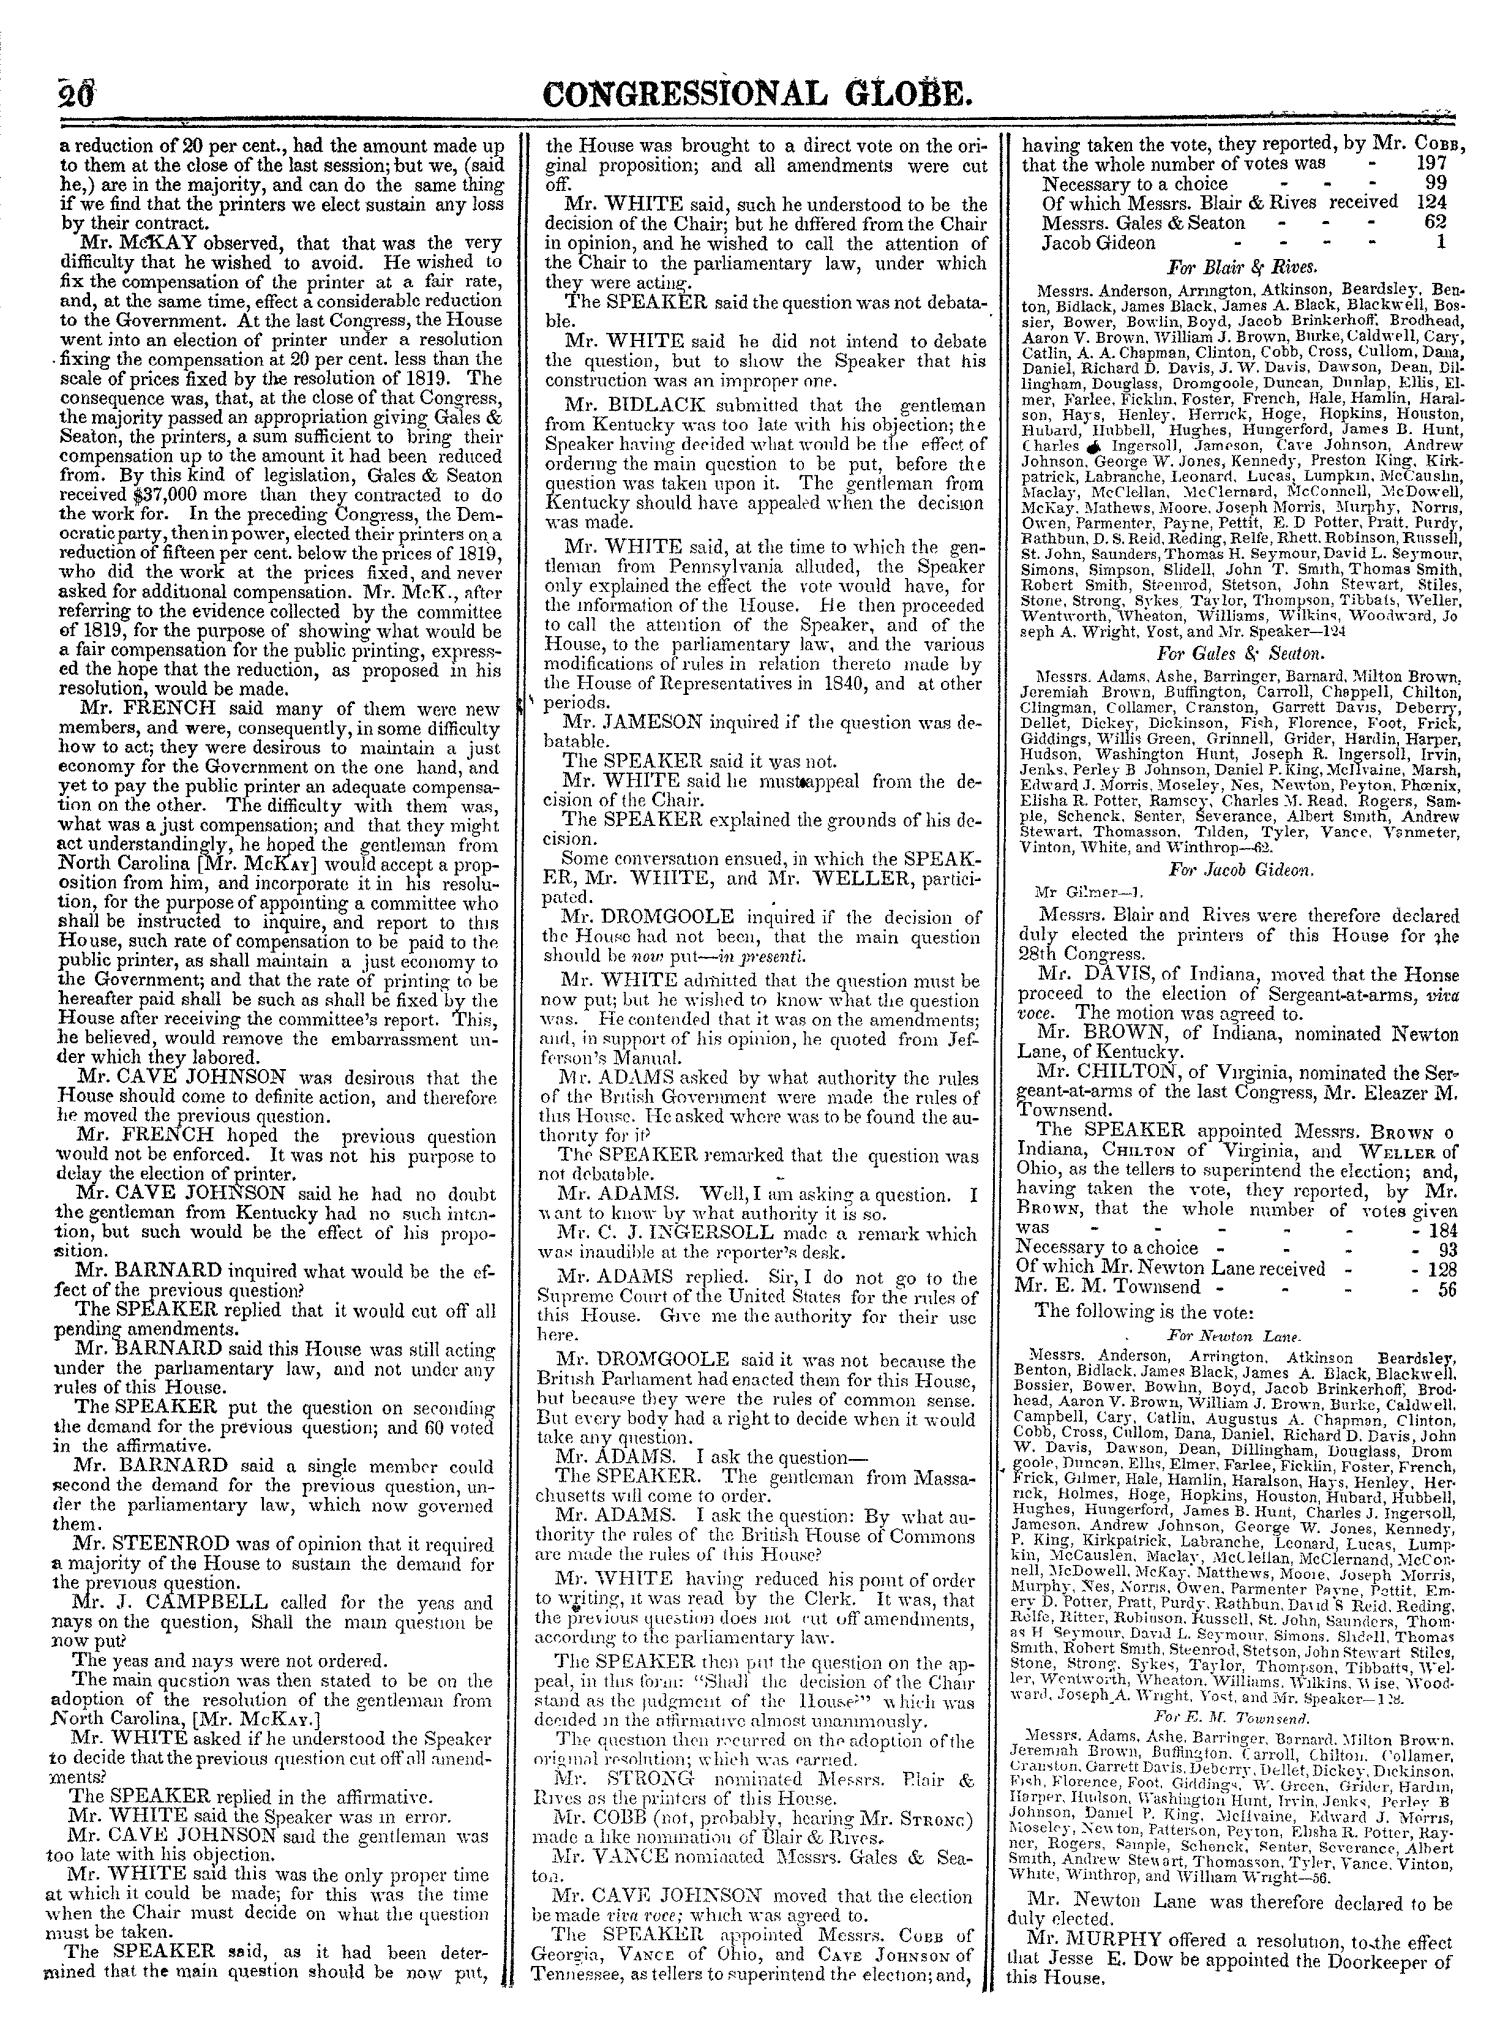 The Congressional Globe, Volume 13, Part 1: Twenty-Eighth Congress, First Session
                                                
                                                    20
                                                